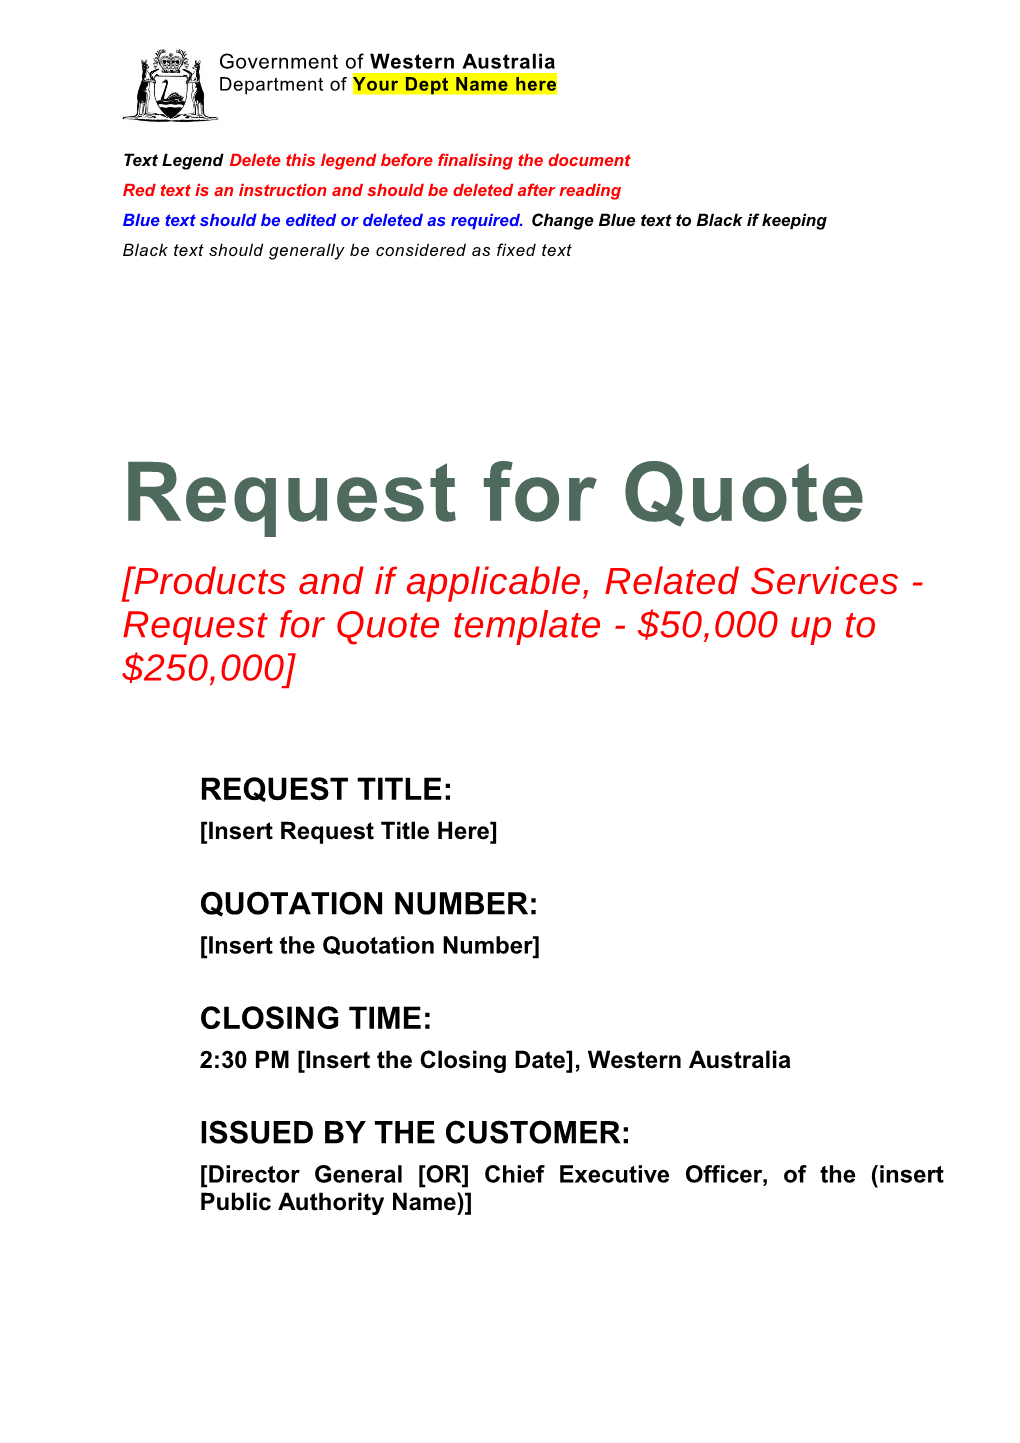 Request for Quote Products